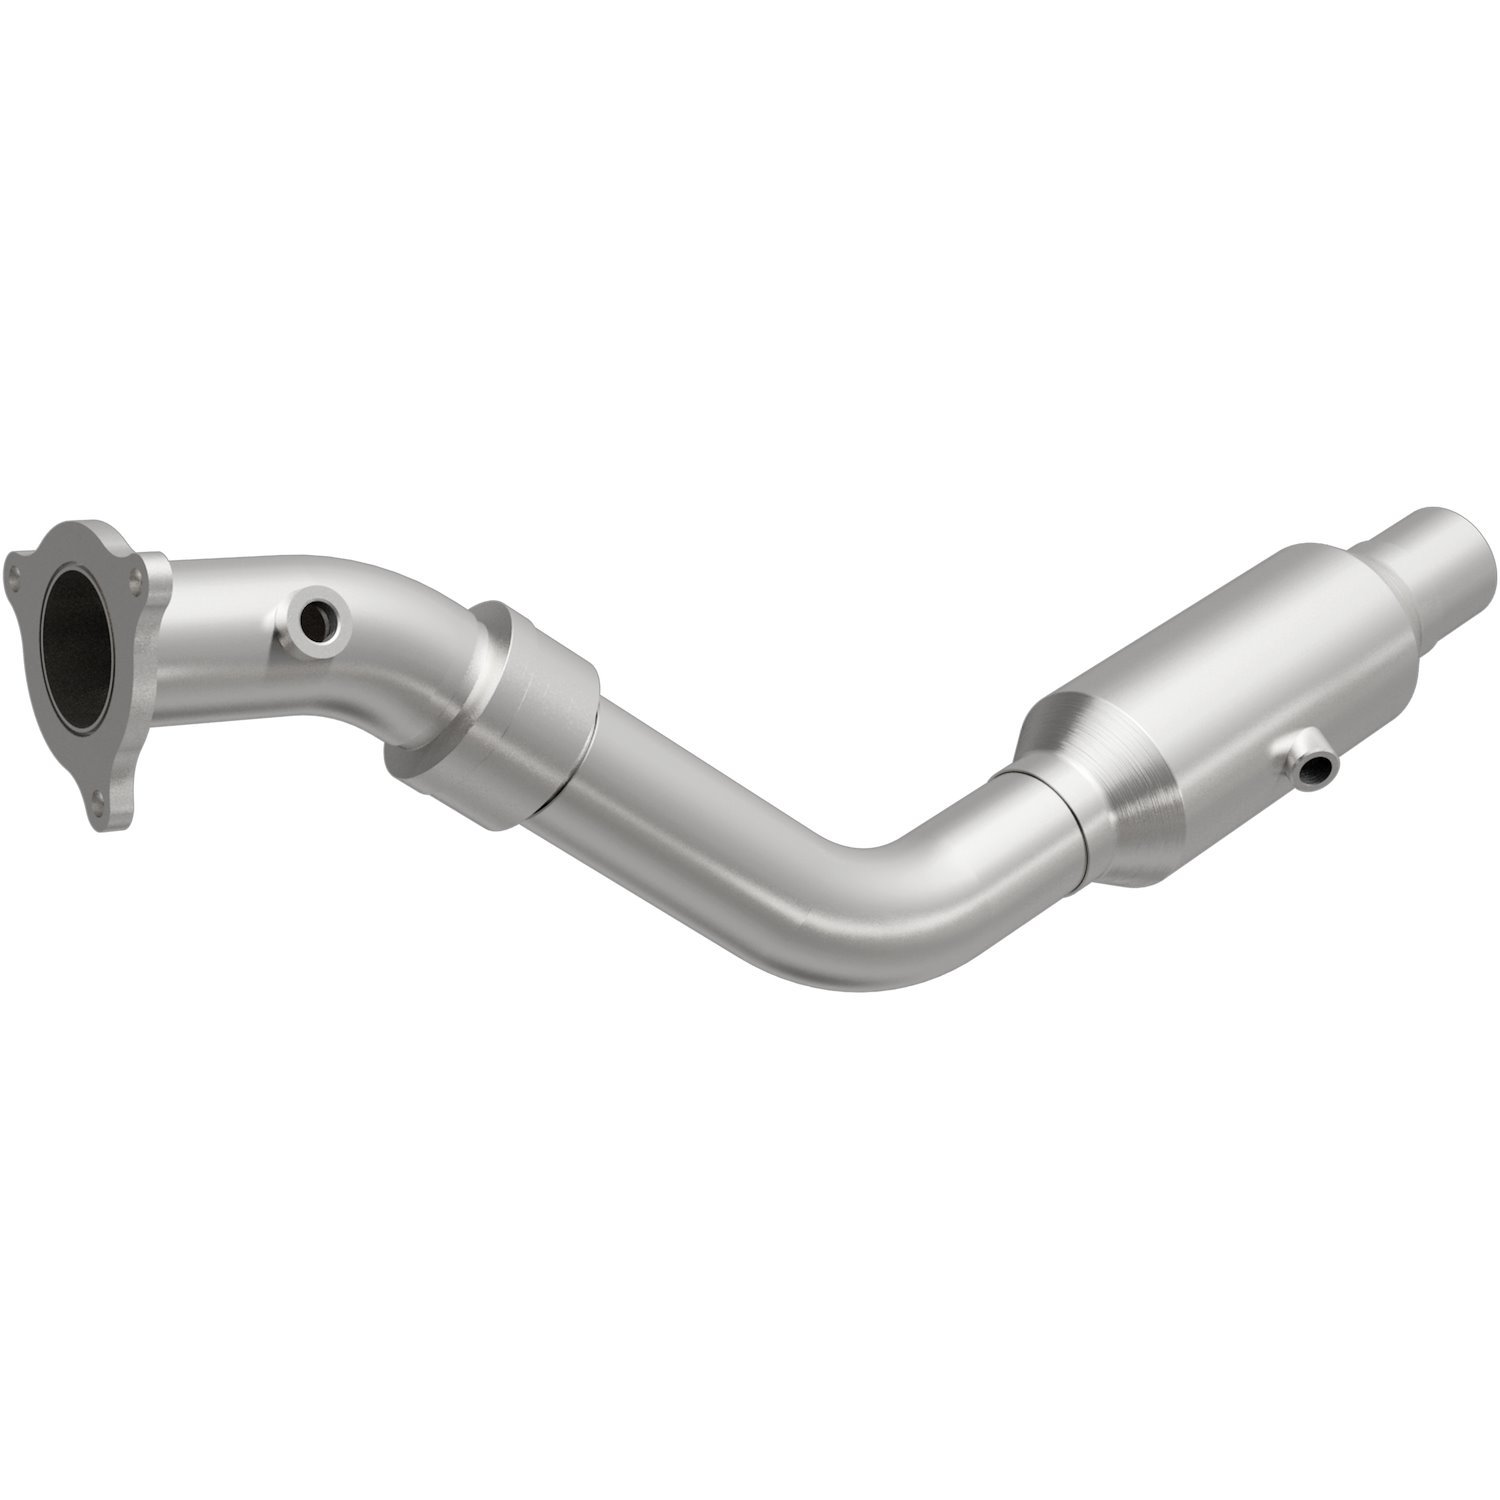 2004-2006 Chrysler Pacifica California Grade CARB Compliant Direct-Fit Catalytic Converter